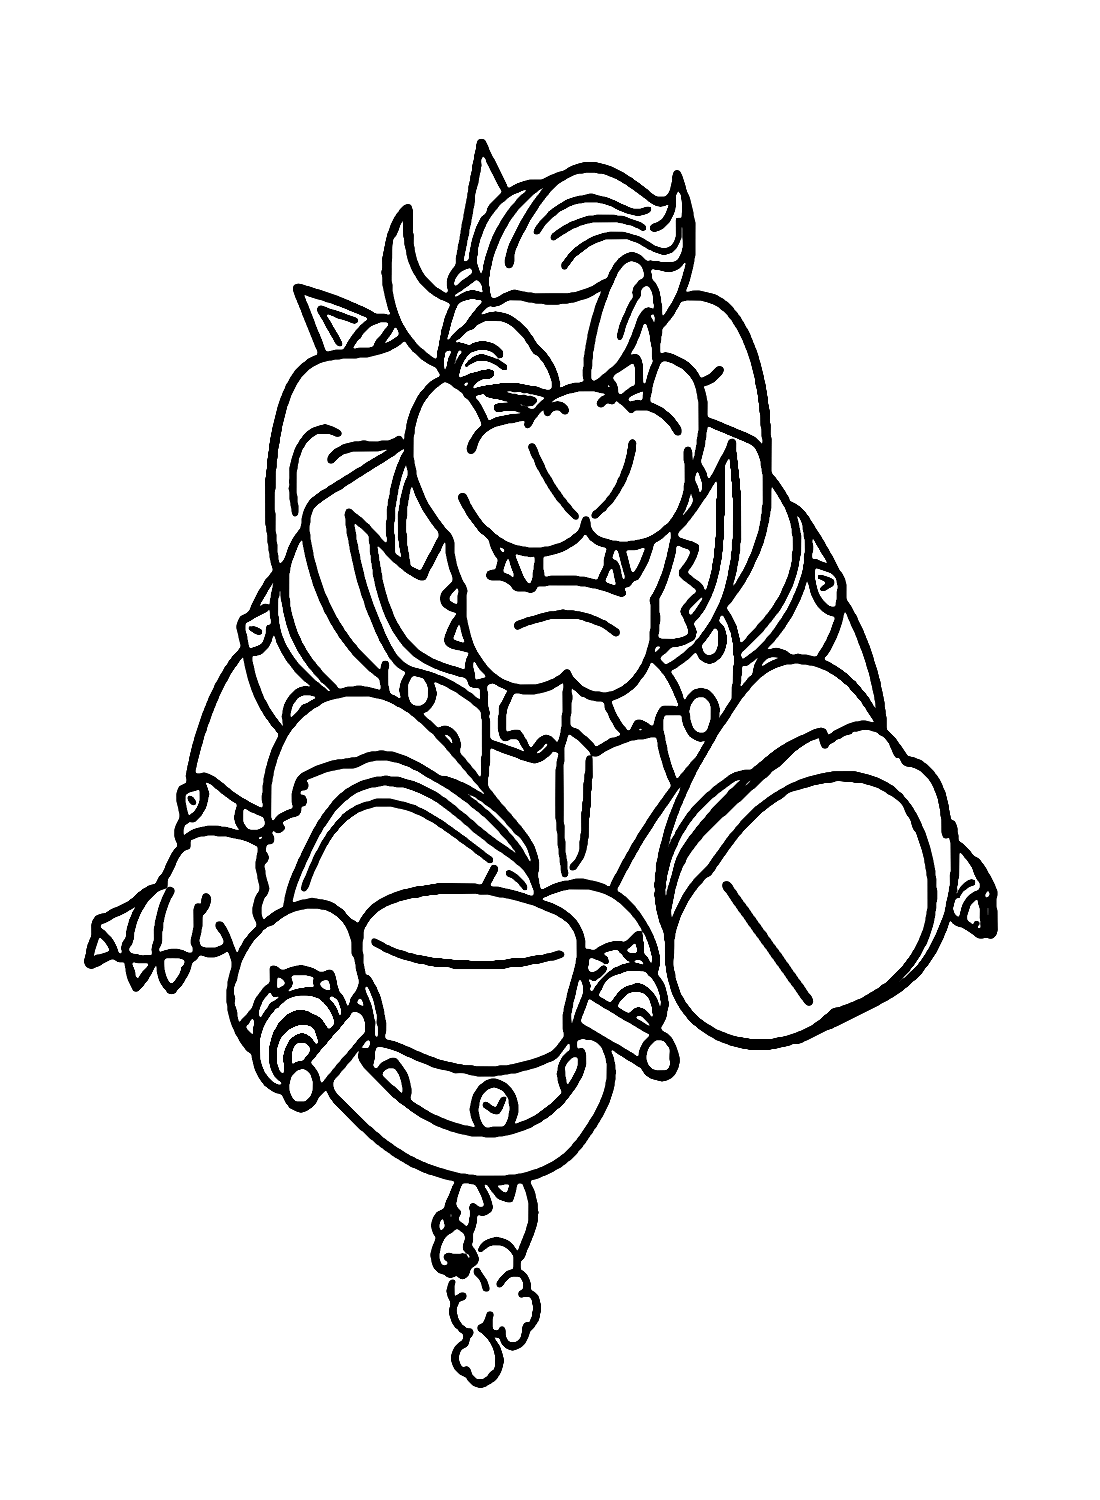 Bowser from Super Mario Odyssey Coloring Pages